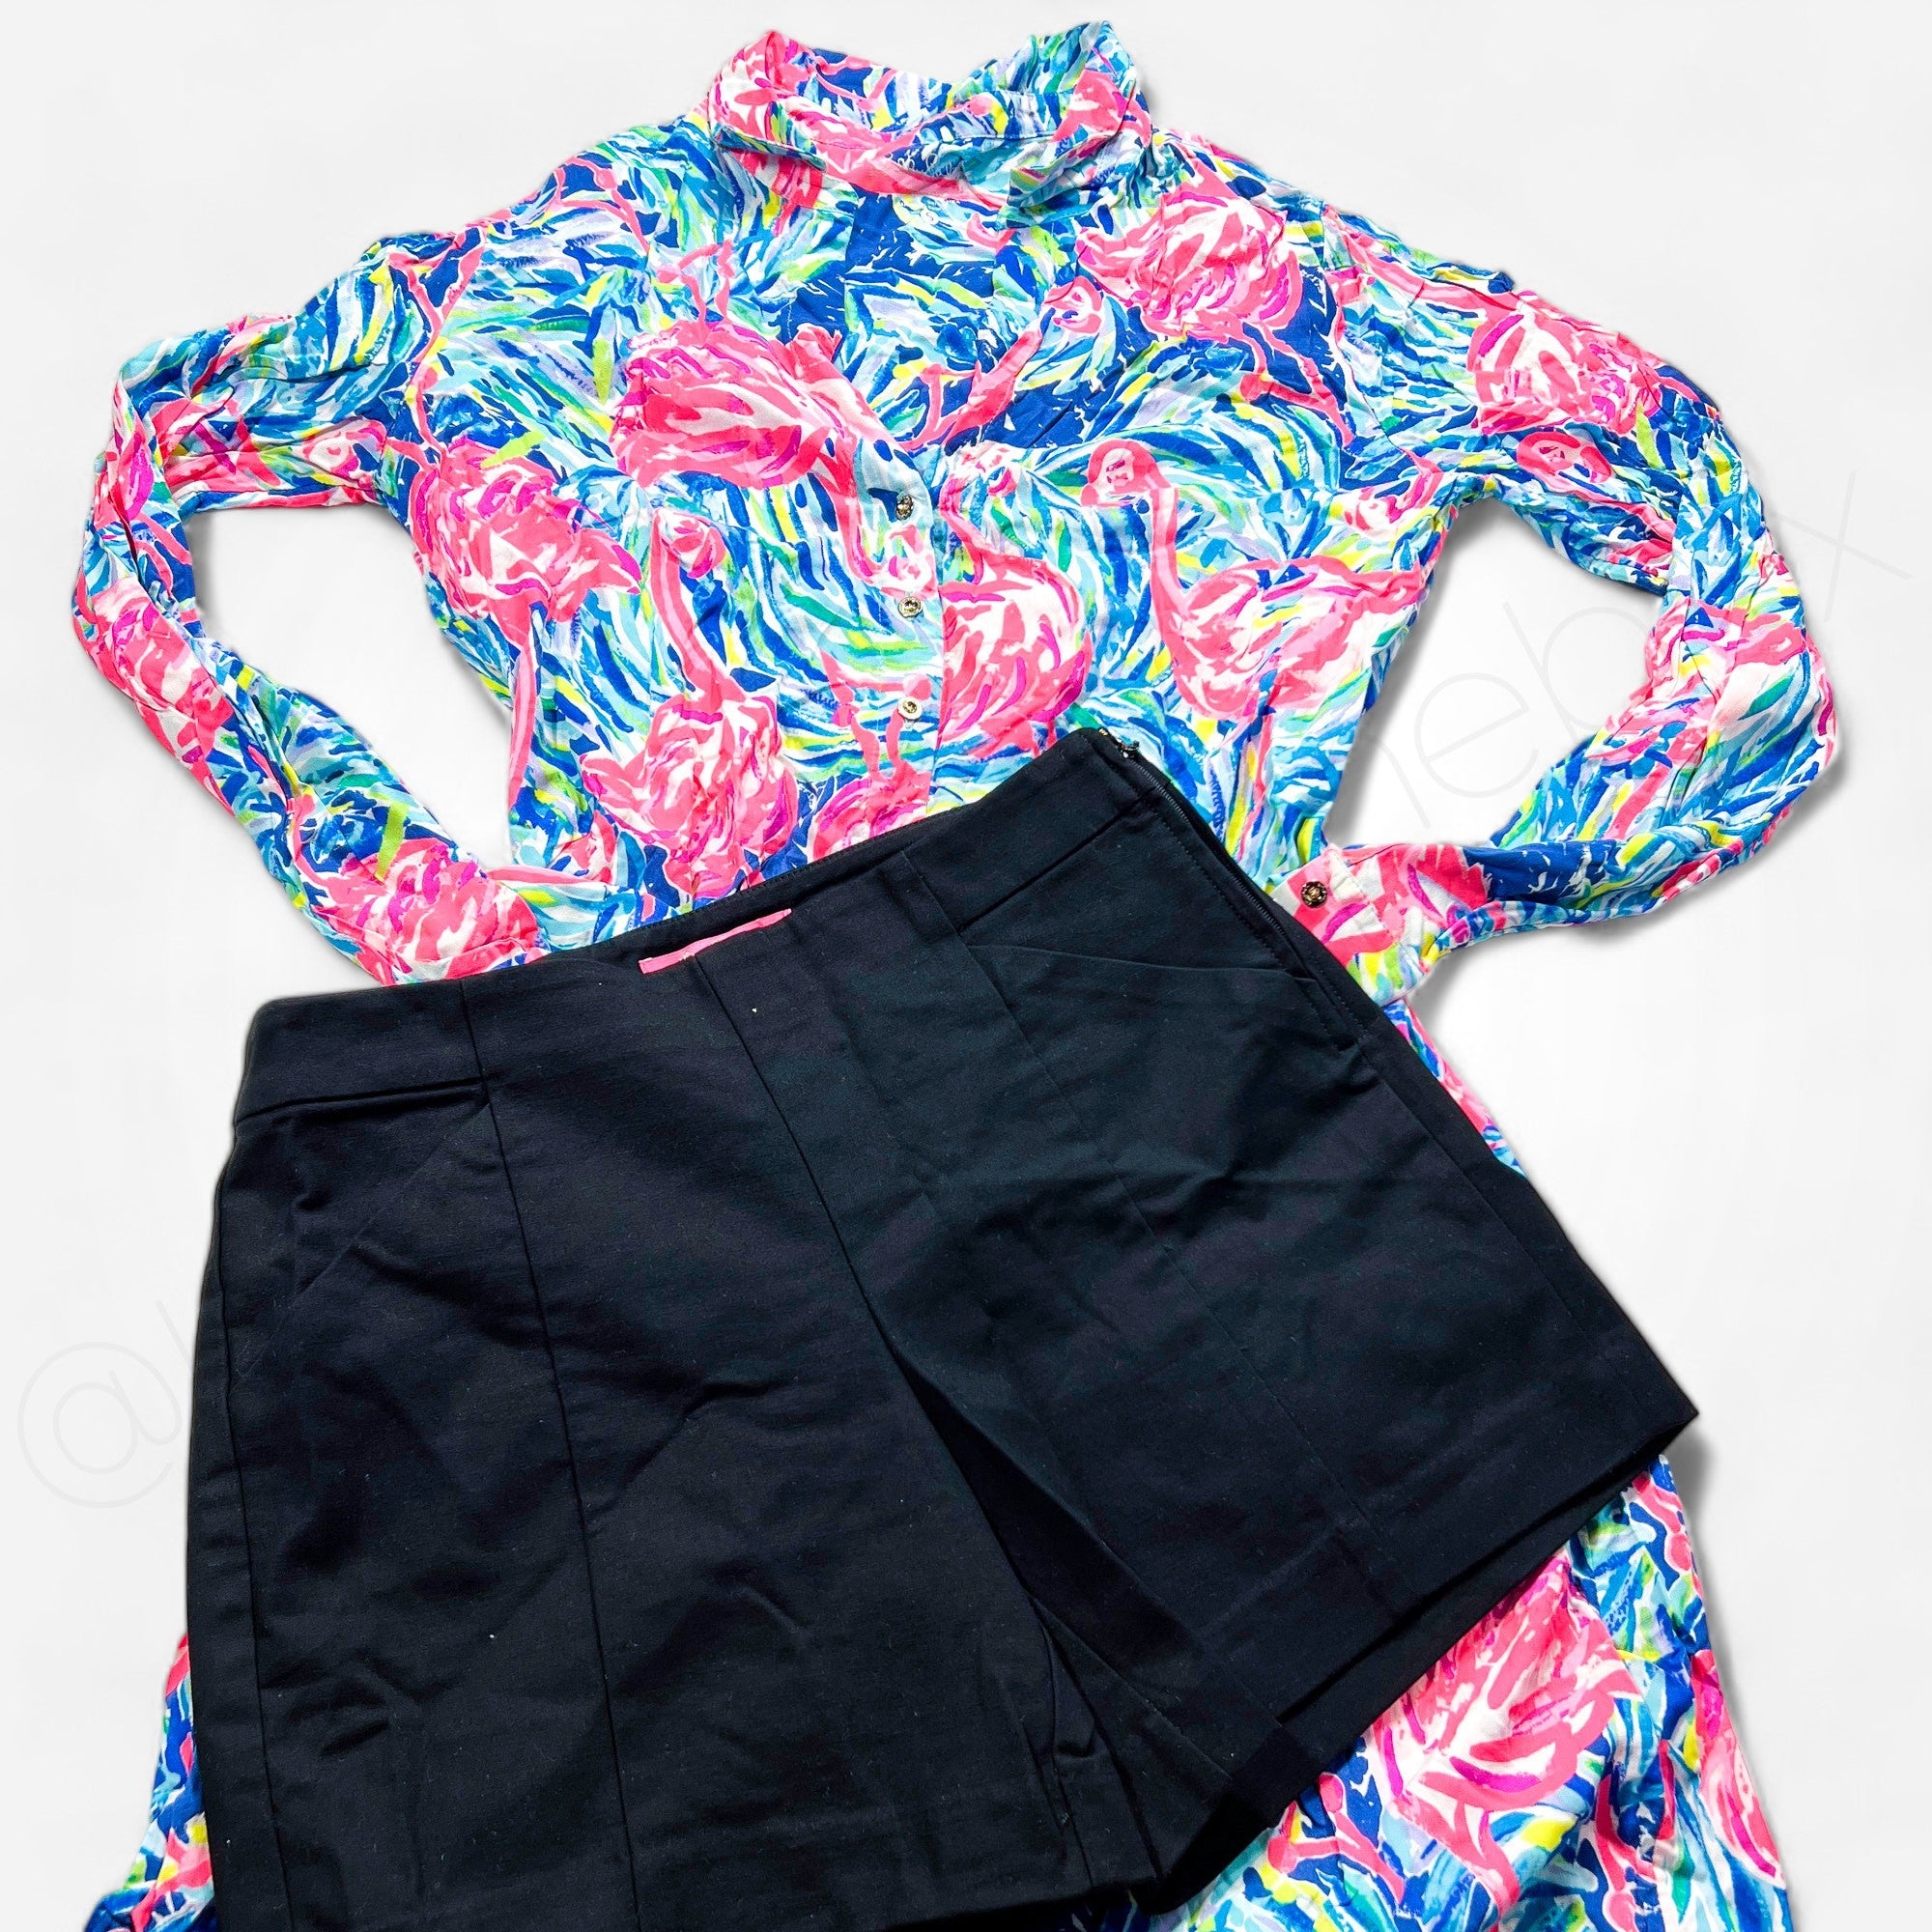 Lilly Pulitzer Women's New Wholesale Clothing - Boutique by the Box Wholesale for Resellers